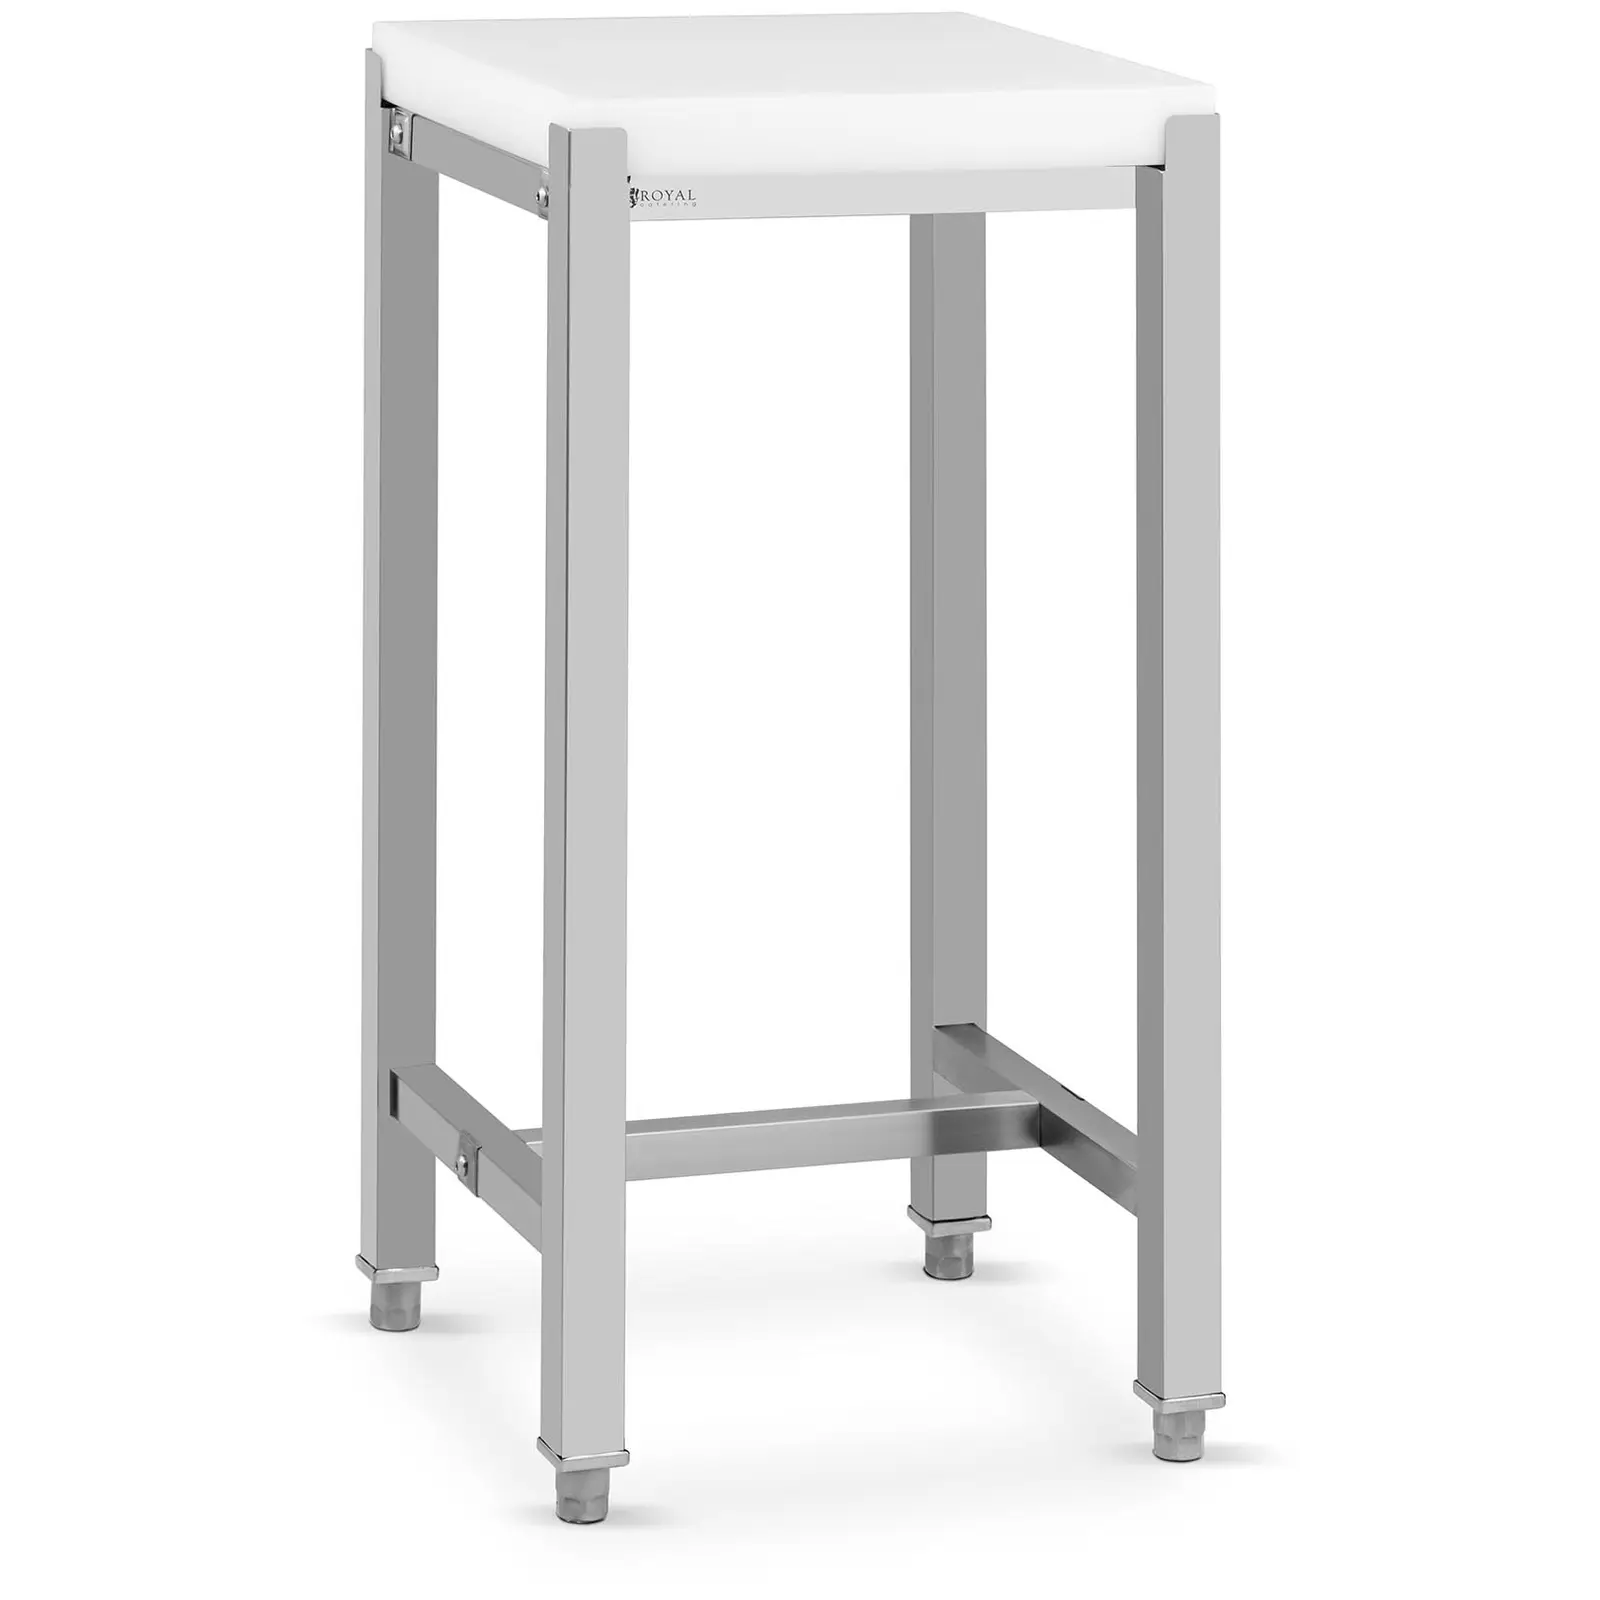 Factory second Butcher block - Stainless Steel - Working height: 40 cm